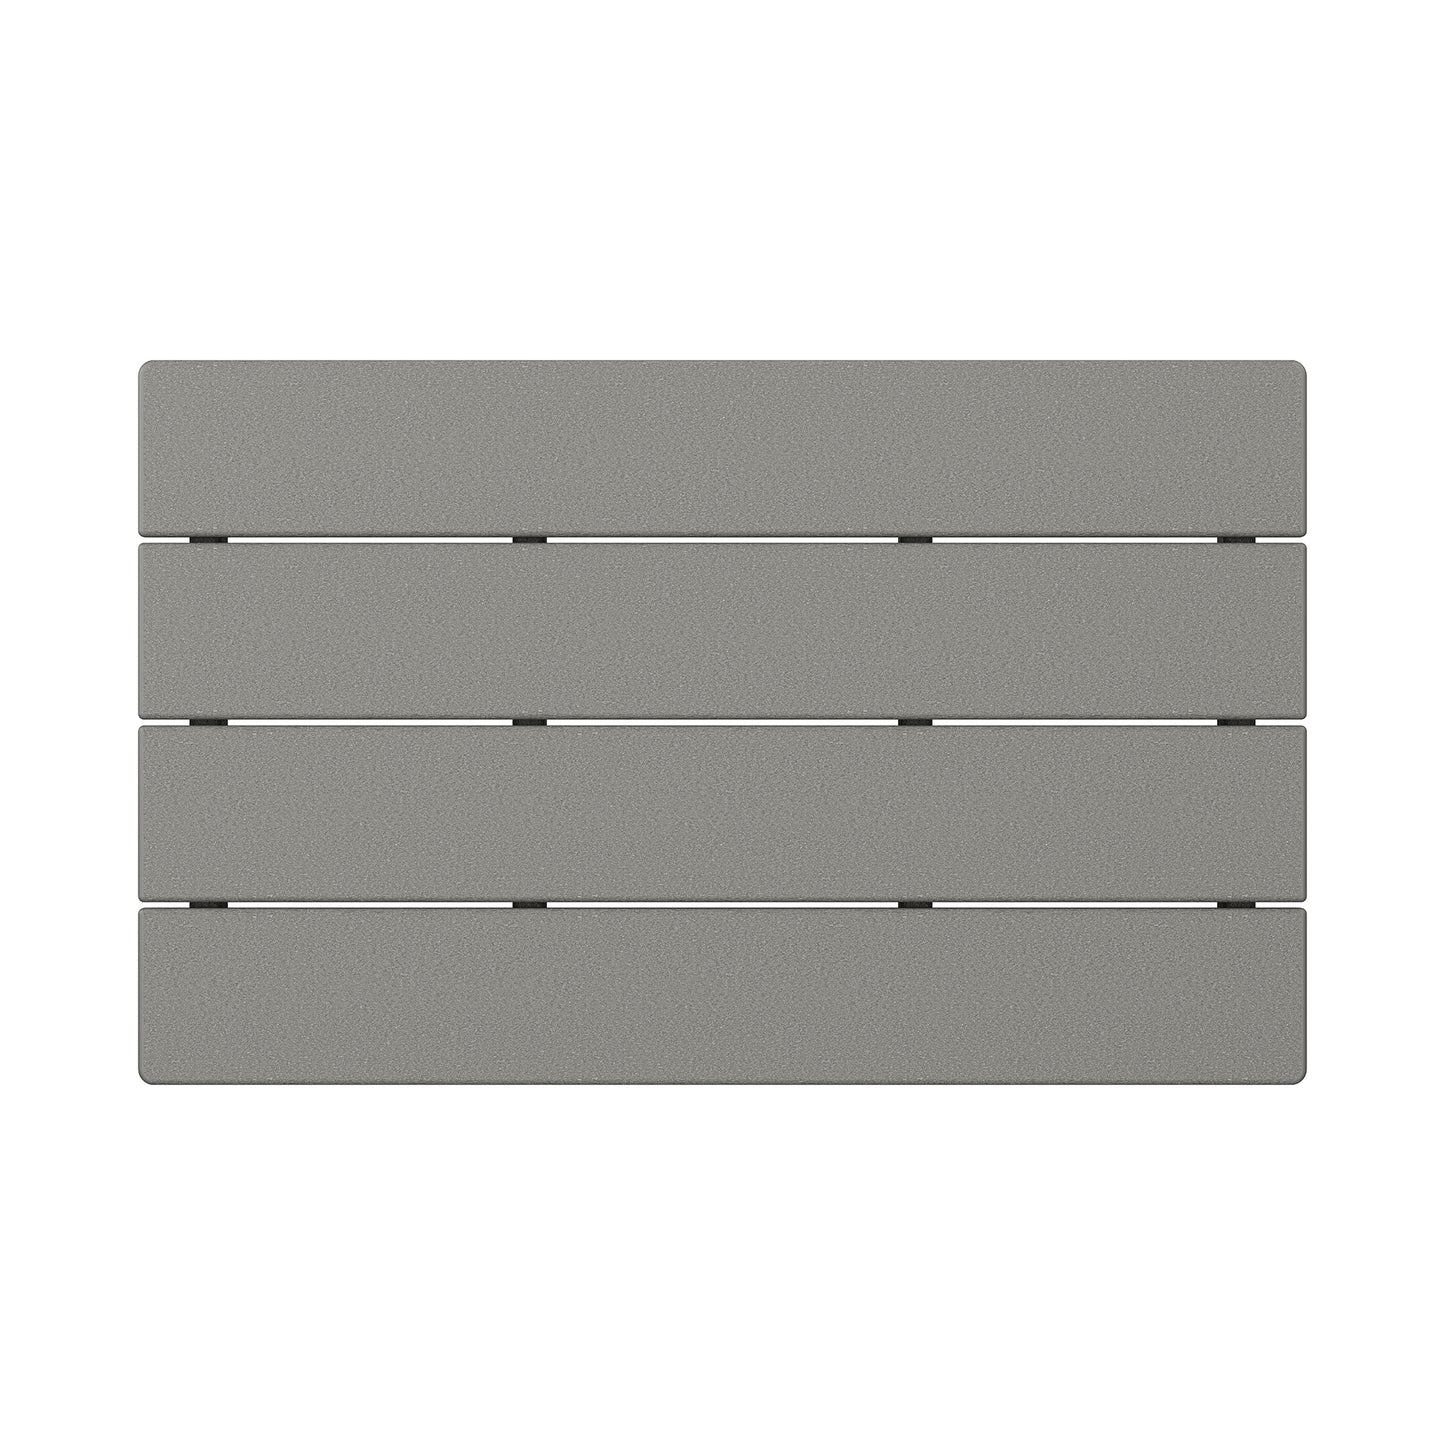 A gray horizontal slat wall panel with six equally spaced slats, featuring marine-grade hardware, viewed from the front against a white background by POLYWOOD Lakeside 23" x 36" Coffee Table.